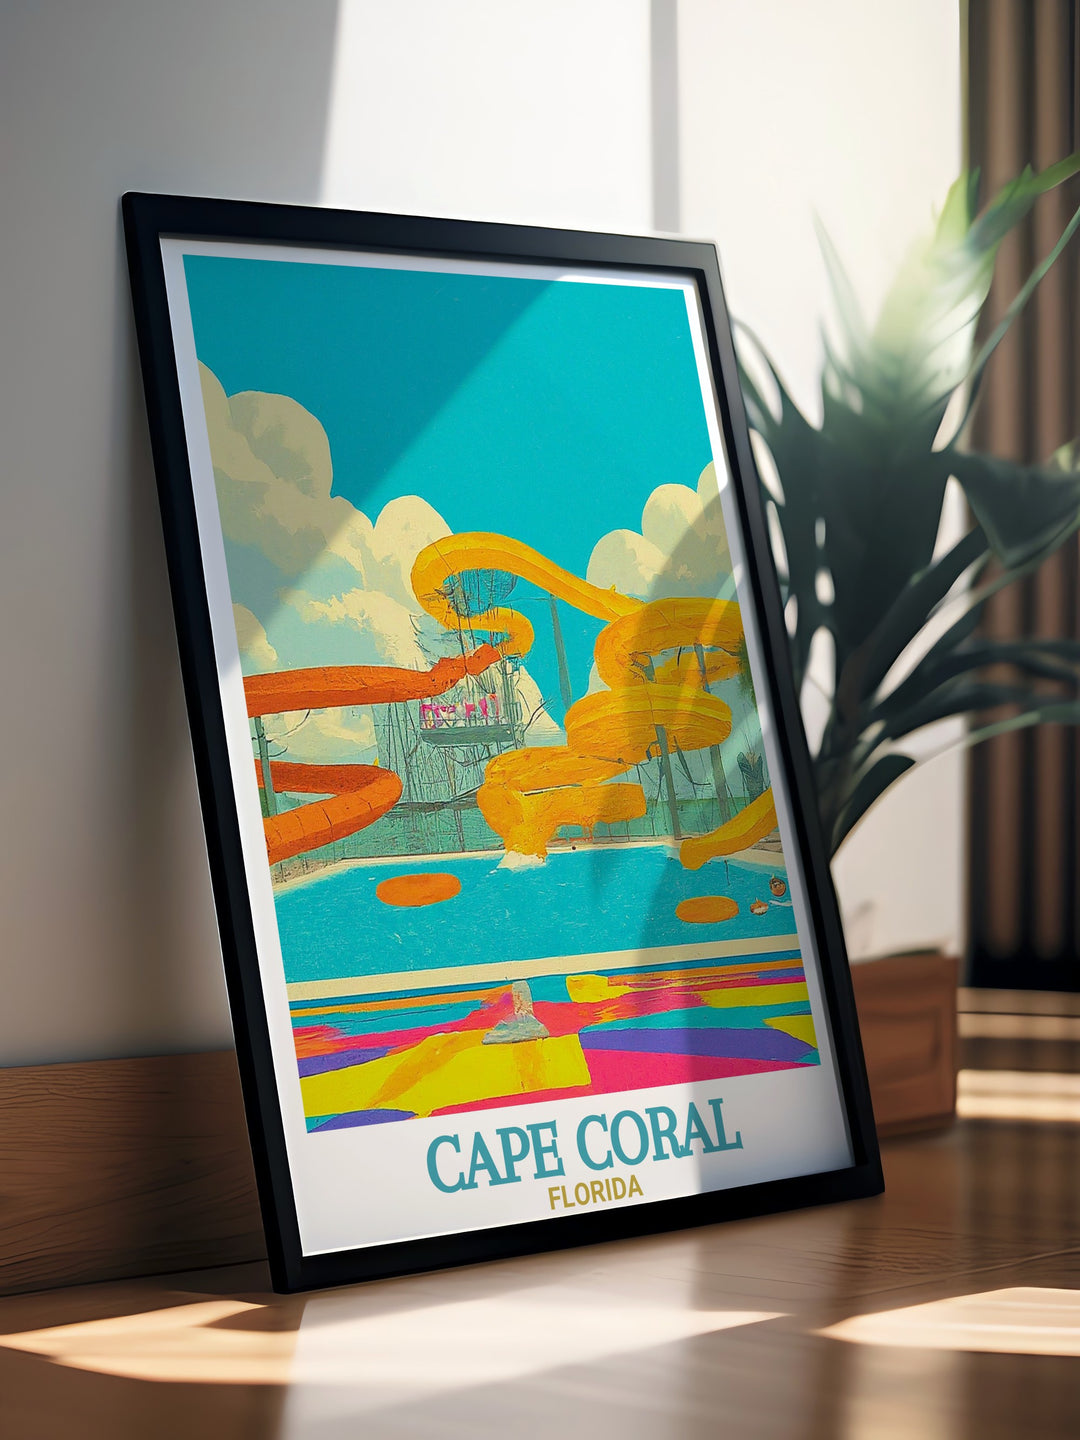 Sun Splash Family Waterpark Wall Art in Cape Coral modern and elegant print showcasing Floridas vibrant atmosphere perfect for home decor and gifts for those who appreciate lively and joyful environments.